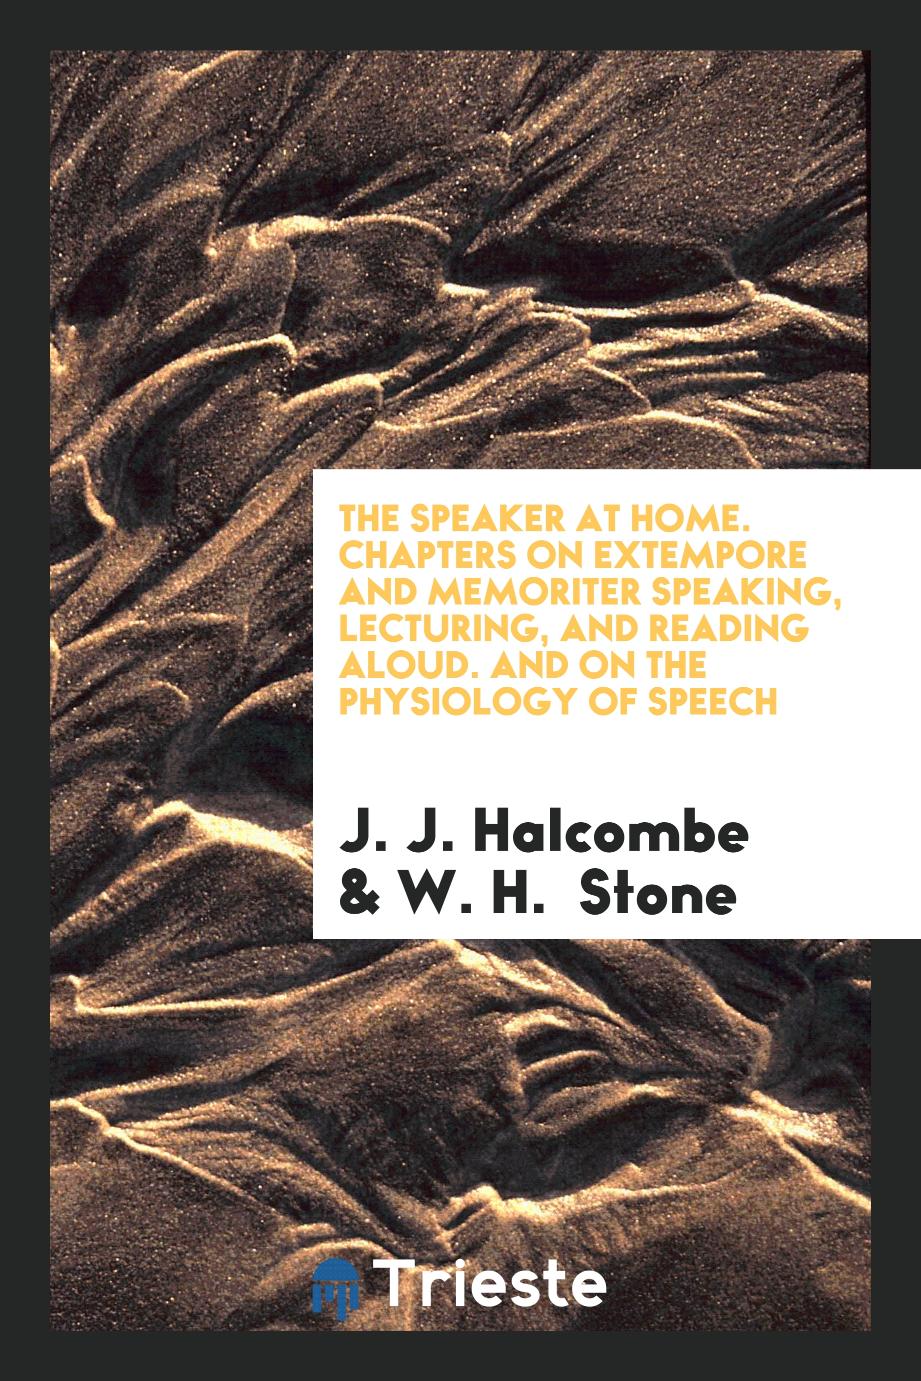 The Speaker at Home. Chapters on Extempore and Memoriter Speaking, Lecturing, and Reading Aloud. And on the Physiology of Speech